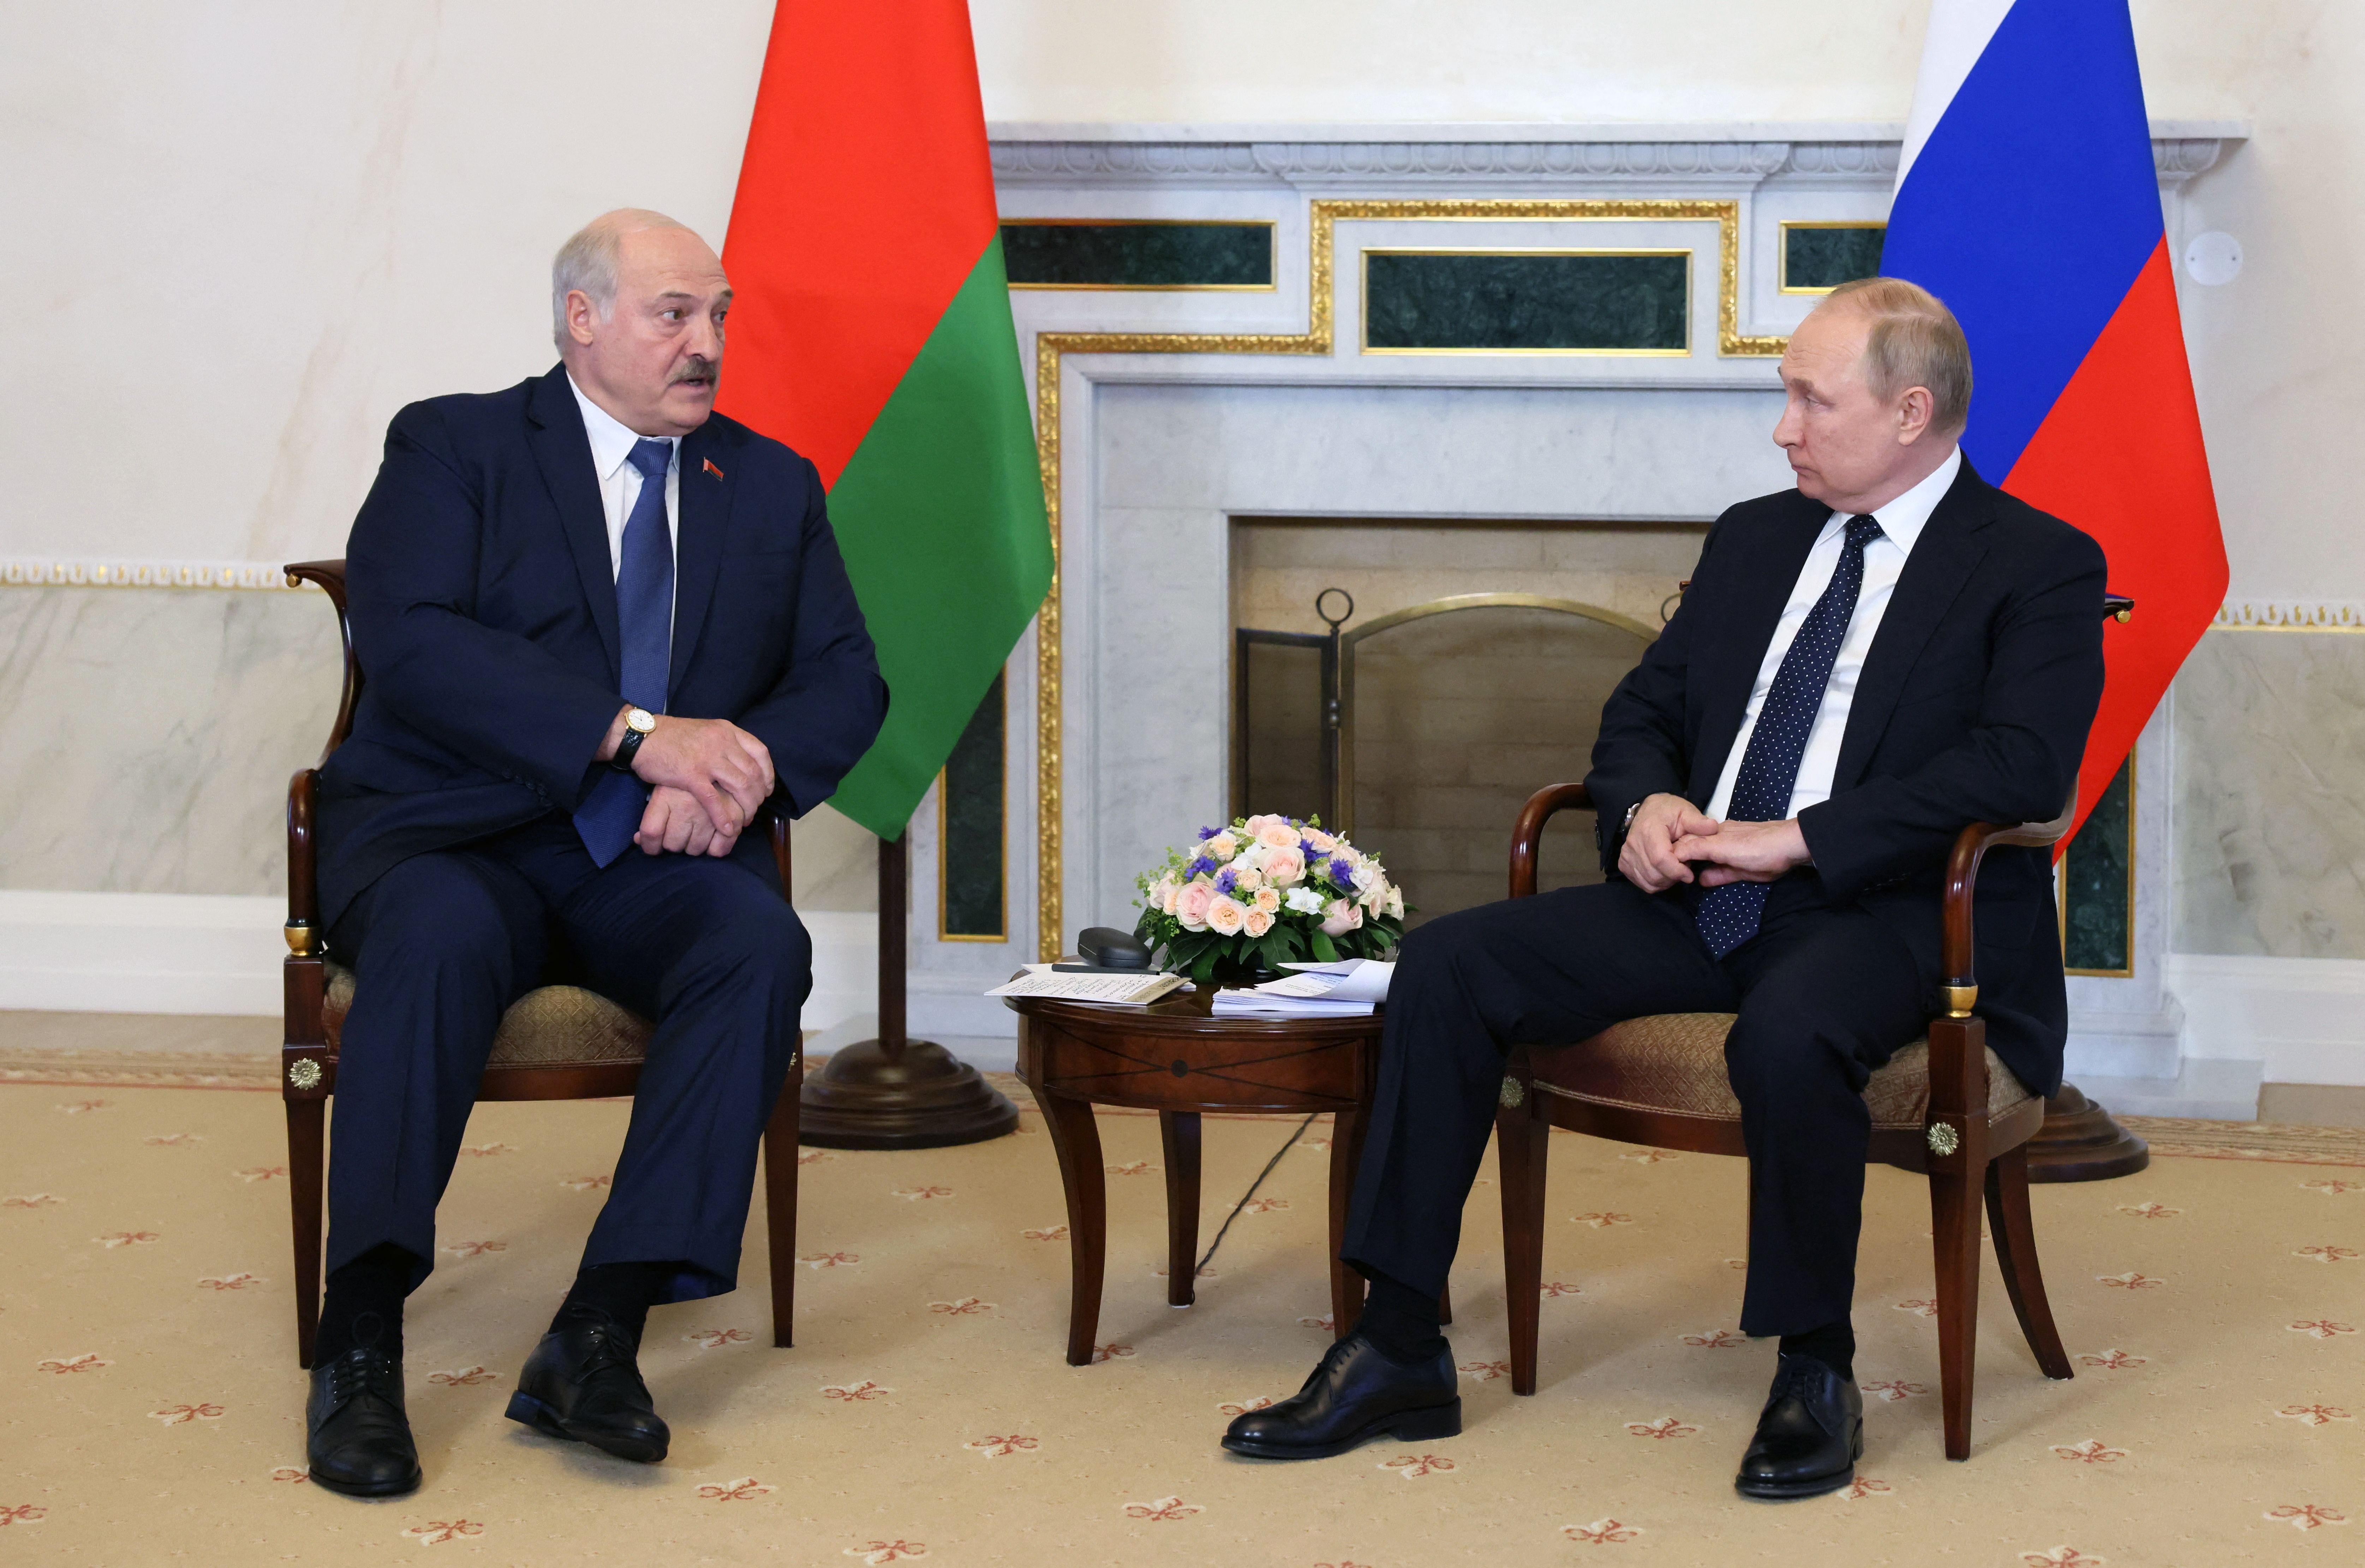 Belarus Weekly: Lukashenko meets with Putin for sixth time this year, taunts world with threat of nuclear proliferation.